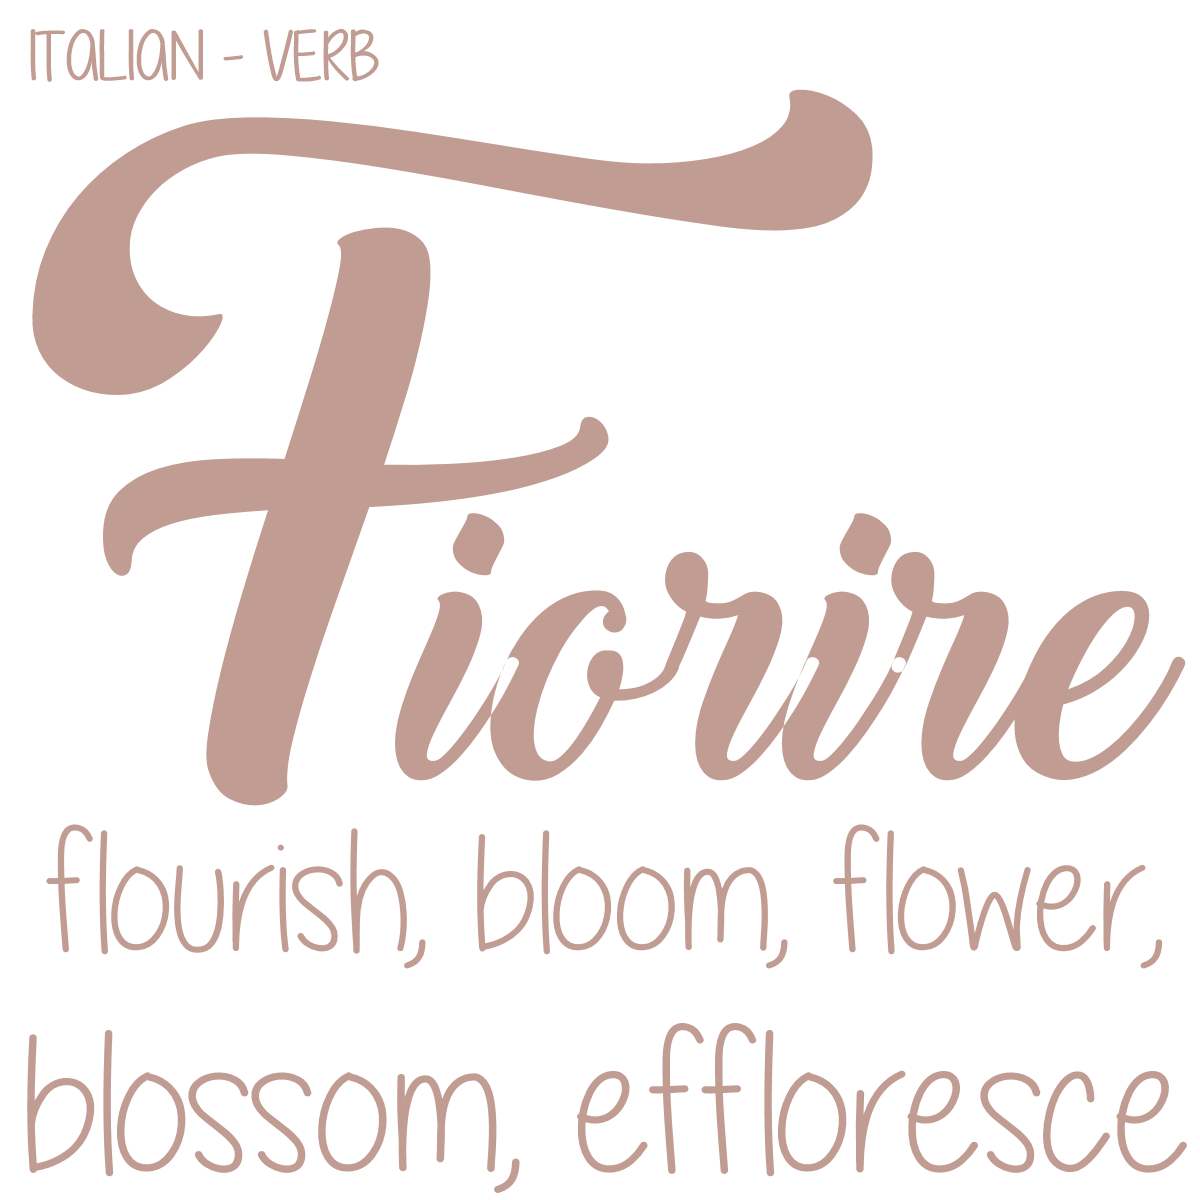 fIORIRE - ITALIAN VERB - FLORUM FASHION SUBMISSION MAGAZINE - ETHICAL NATURAL SUSTAINABLE - ECO TRAVEL - DIGITAL NOMAD - PASSION PASSPORT - GREEN ORGANIC.jpg